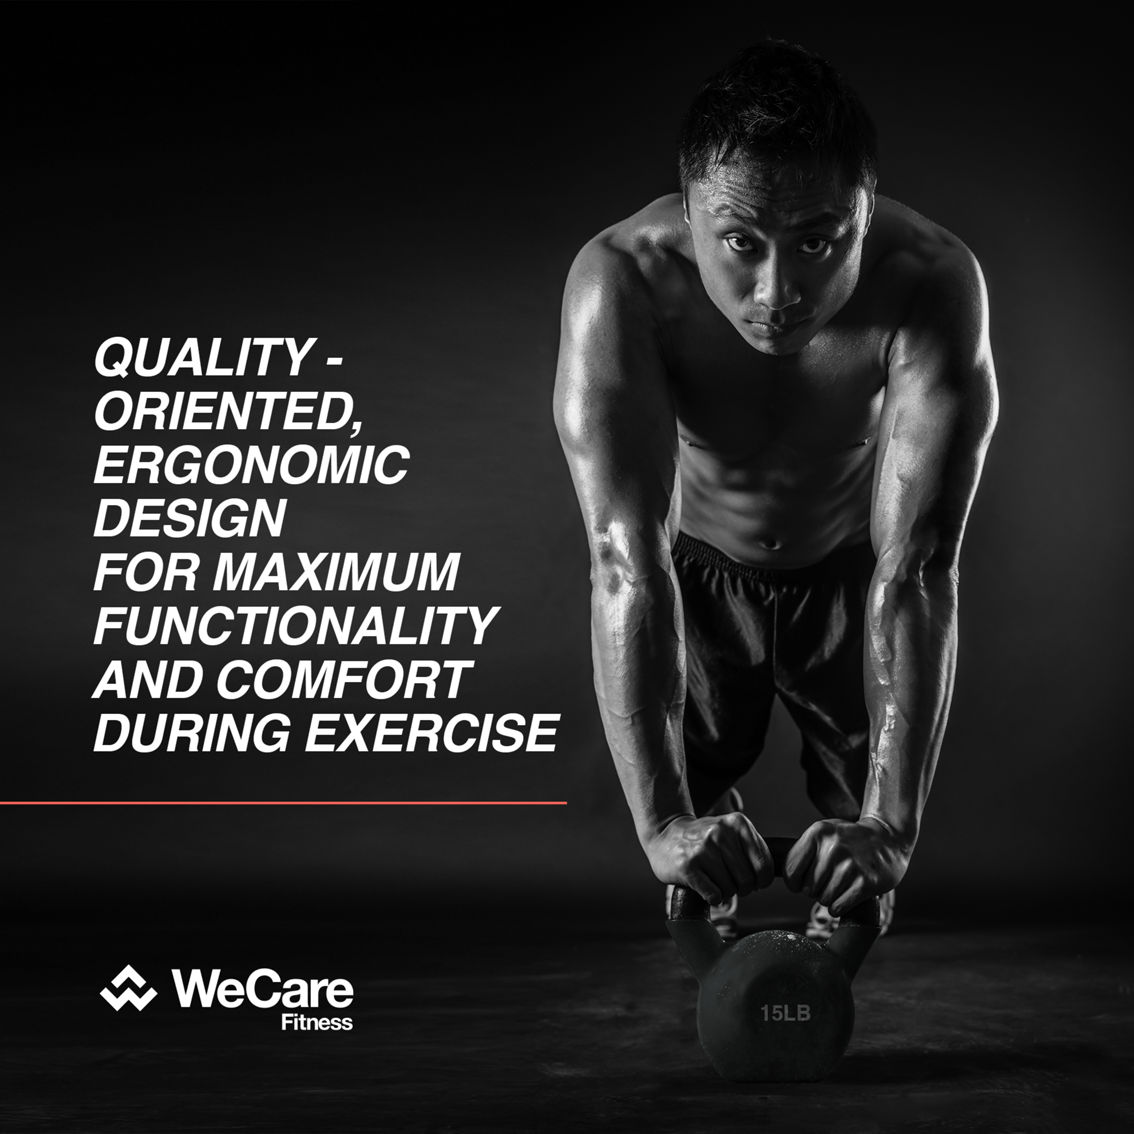 WeCare 15 LB Cast Iron Fitness Kettlebell - Image 4 of 8